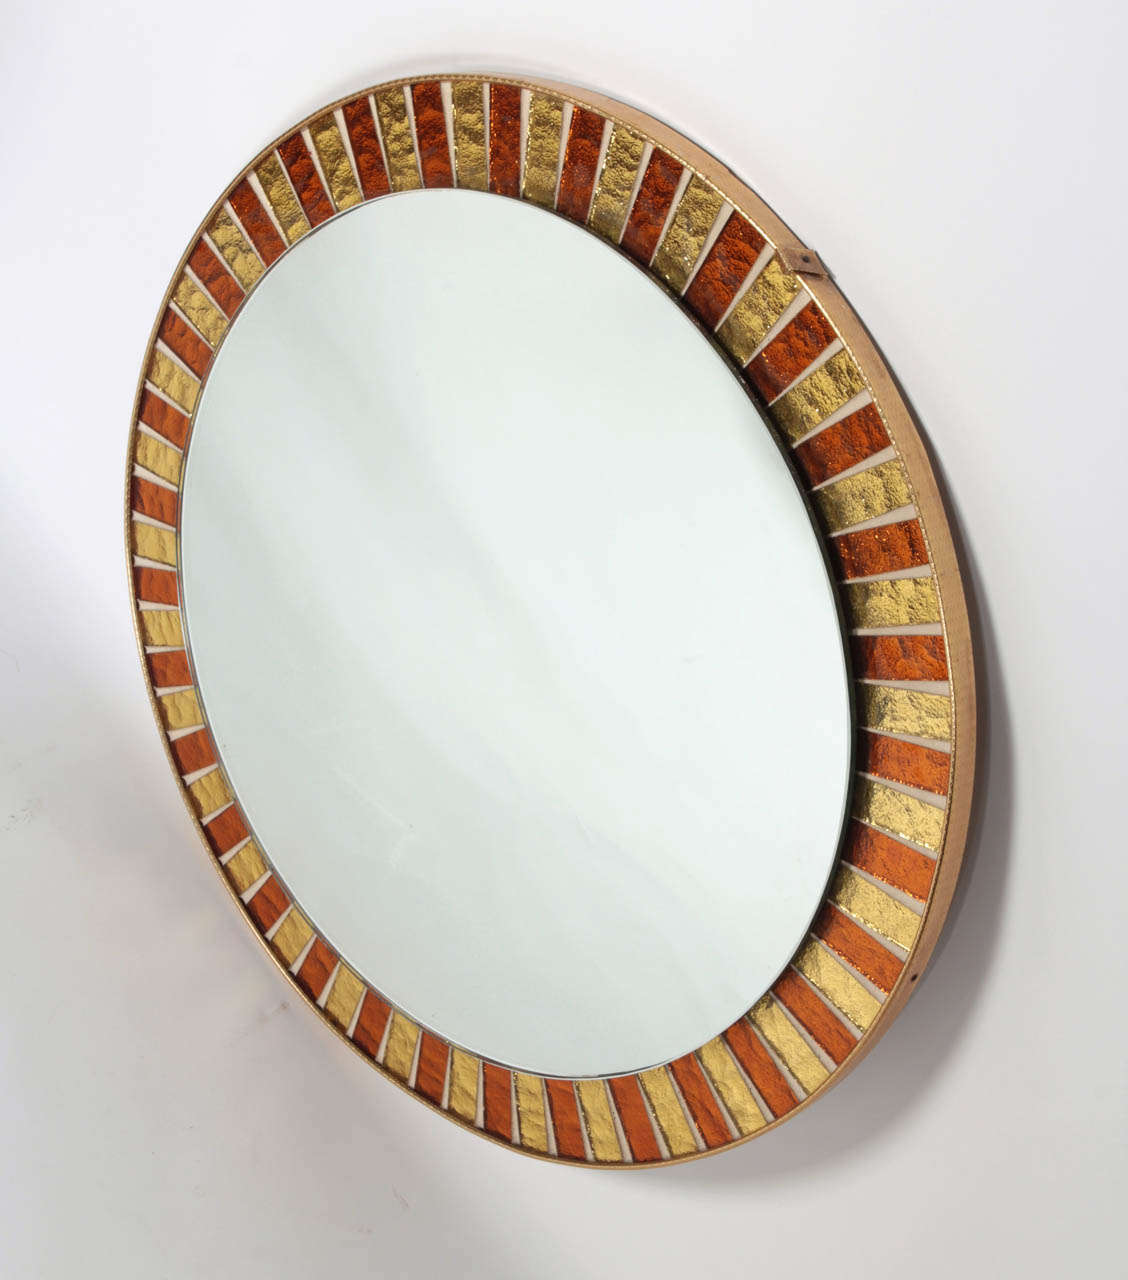 Round Spanish 1960s mirror with alternating copper and gold mosaic.

Ref #: DM0609-07

Dimensions: 22